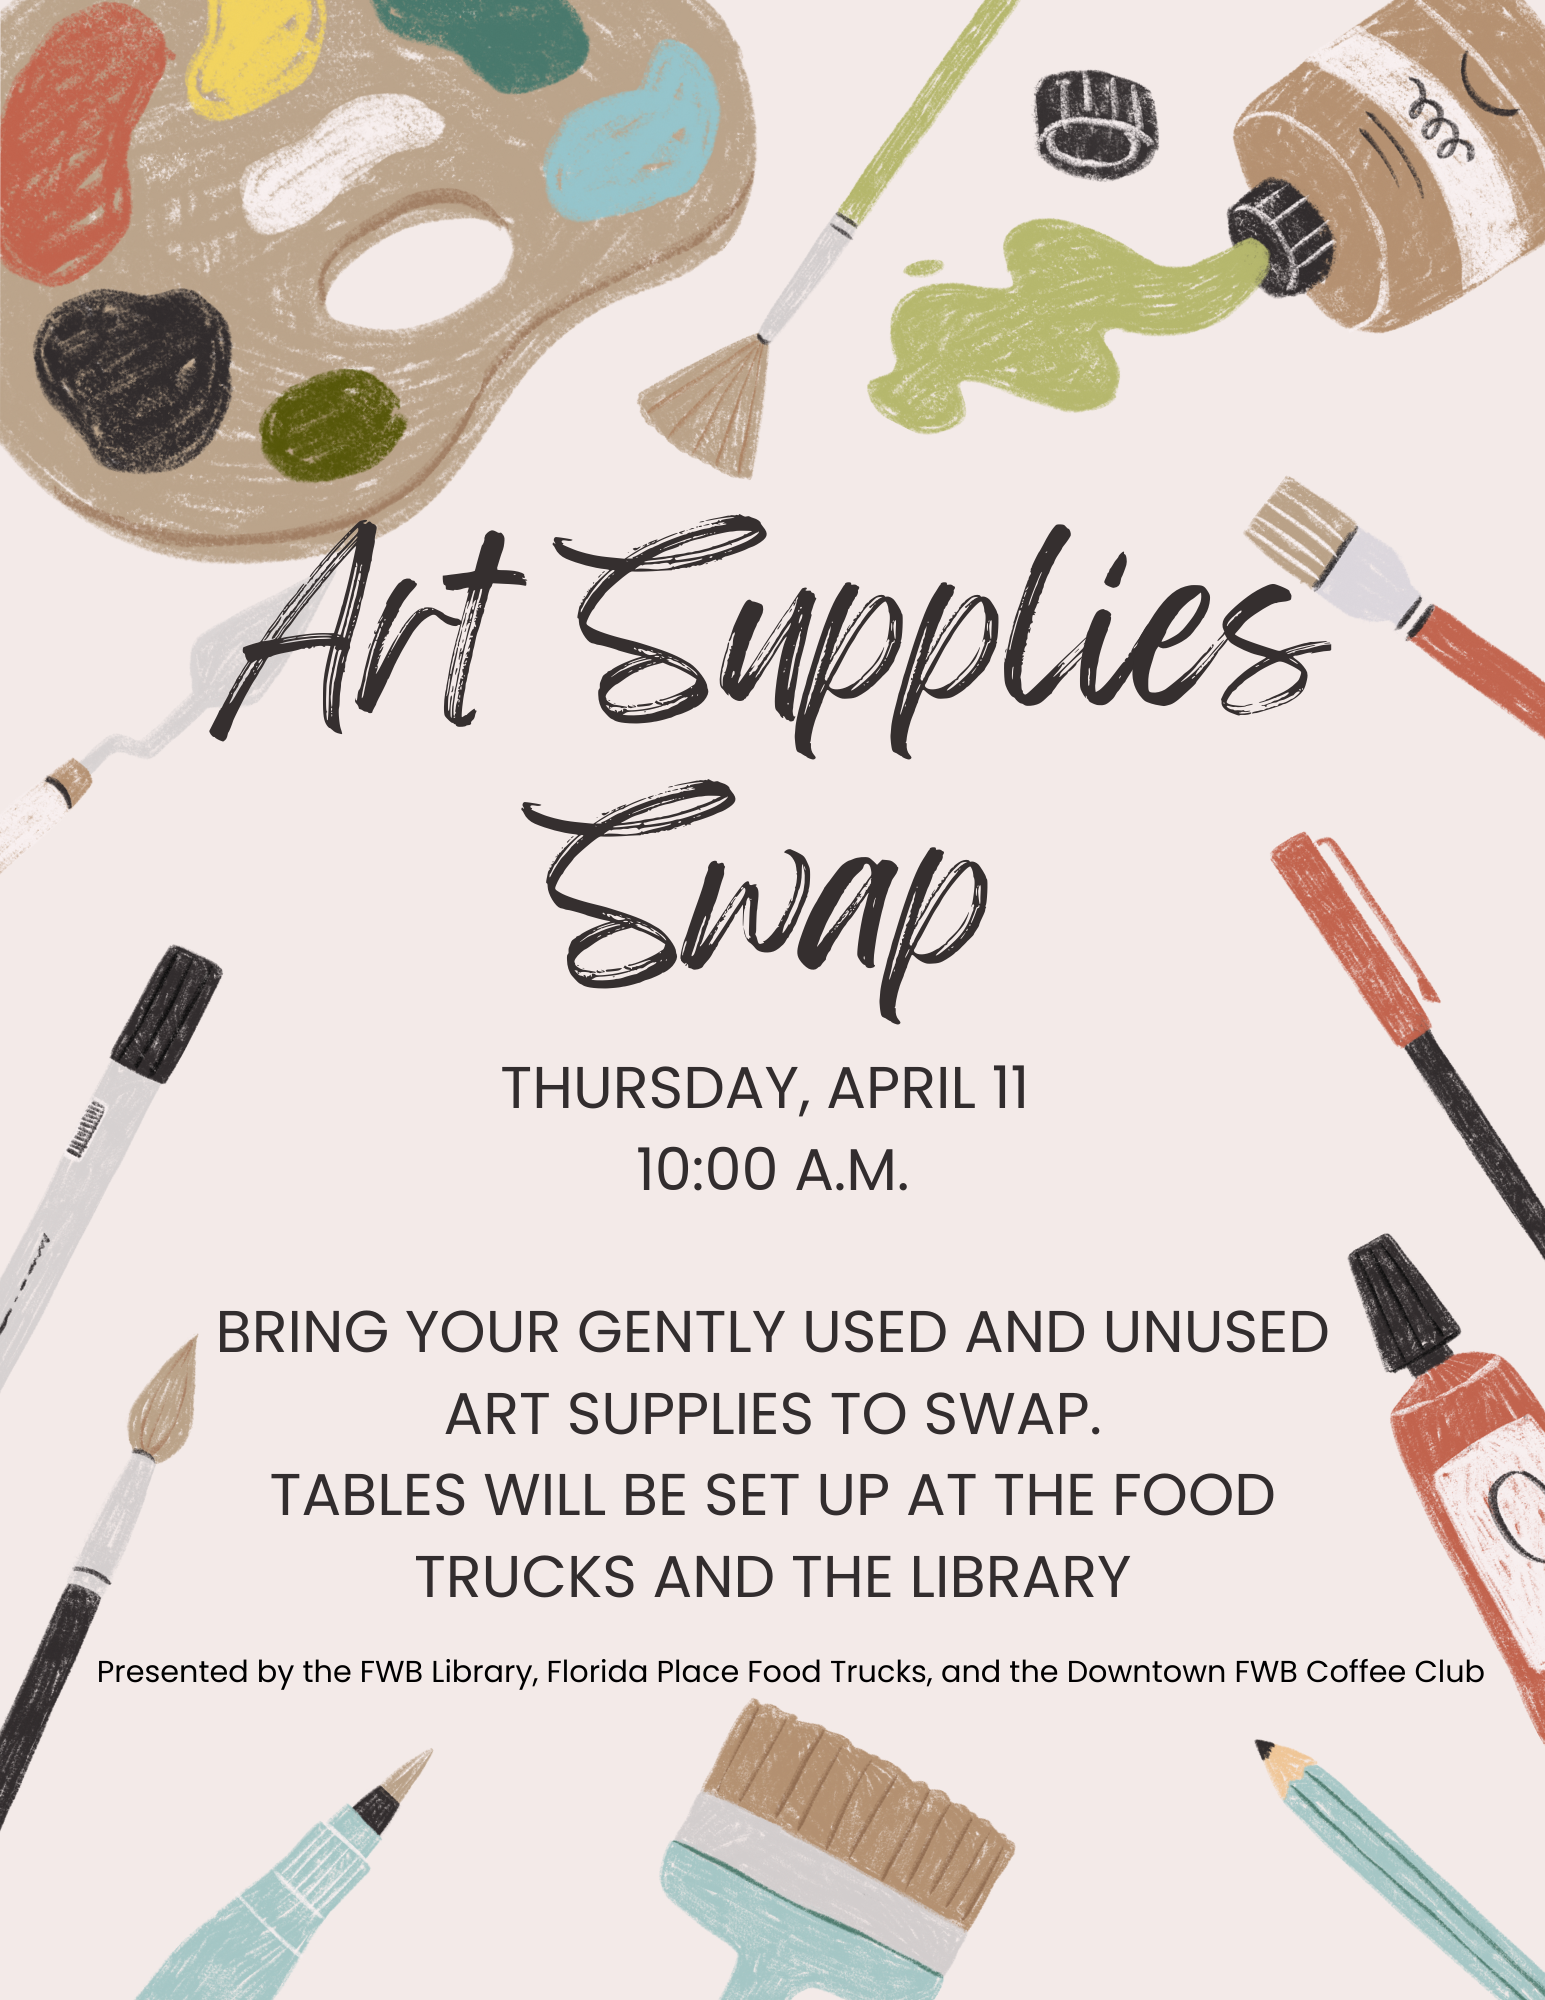 Art Supply Swap at the Fort Walton Beach Library Thursday April 11 at 10:00 a.m.